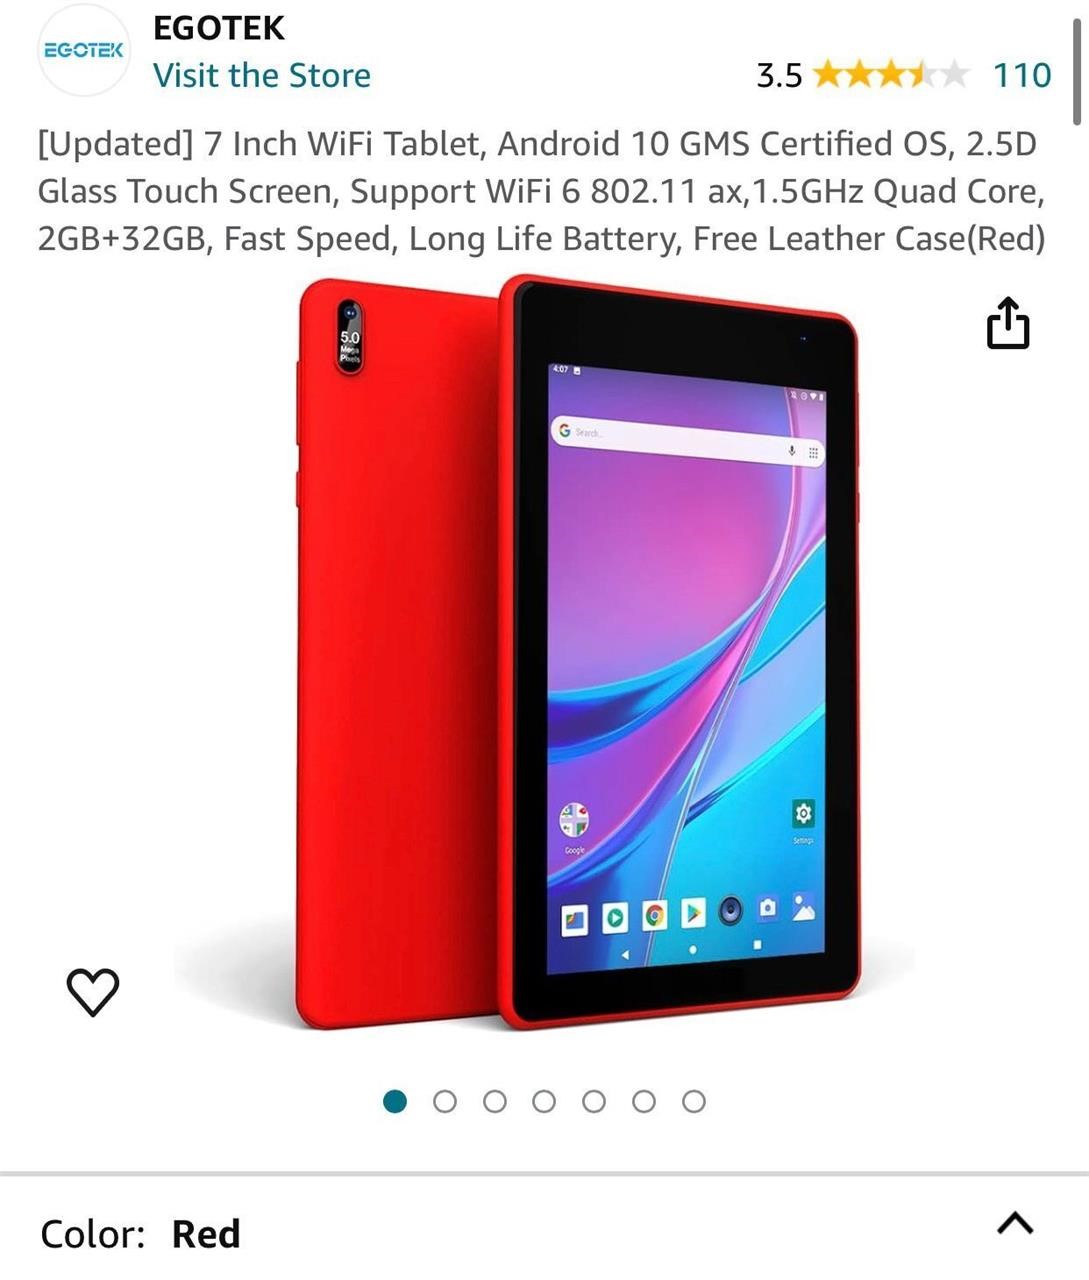 7 Inch WiFi Tablet, Android